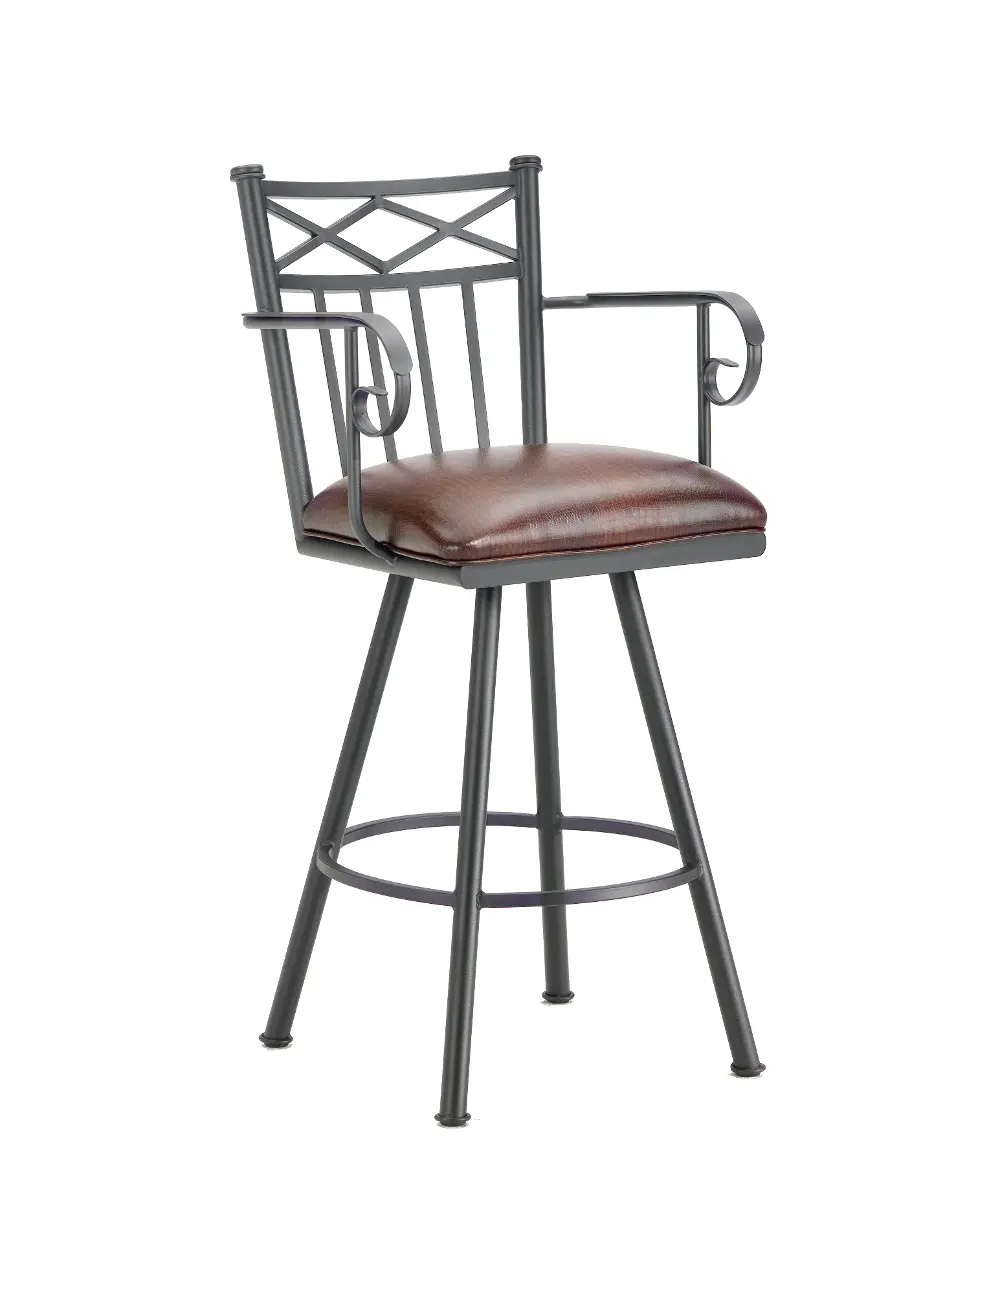 Brown and Black Metal Swivel Bar Stool with Arms- Alexander-1